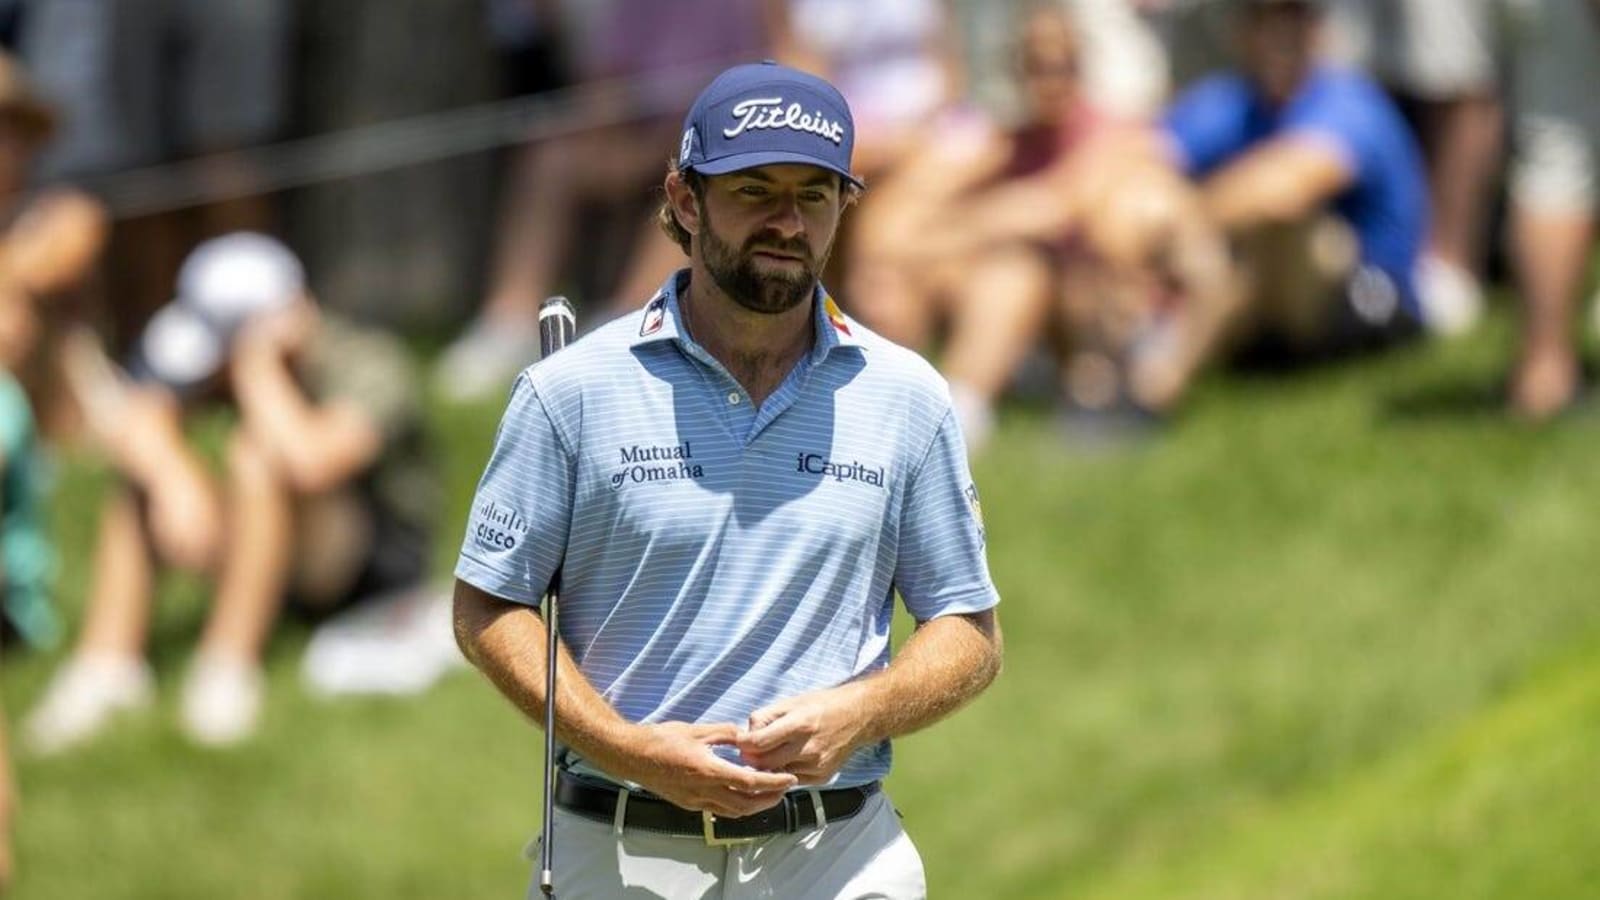 Cameron Young carries John Deere Classic lead into weekend